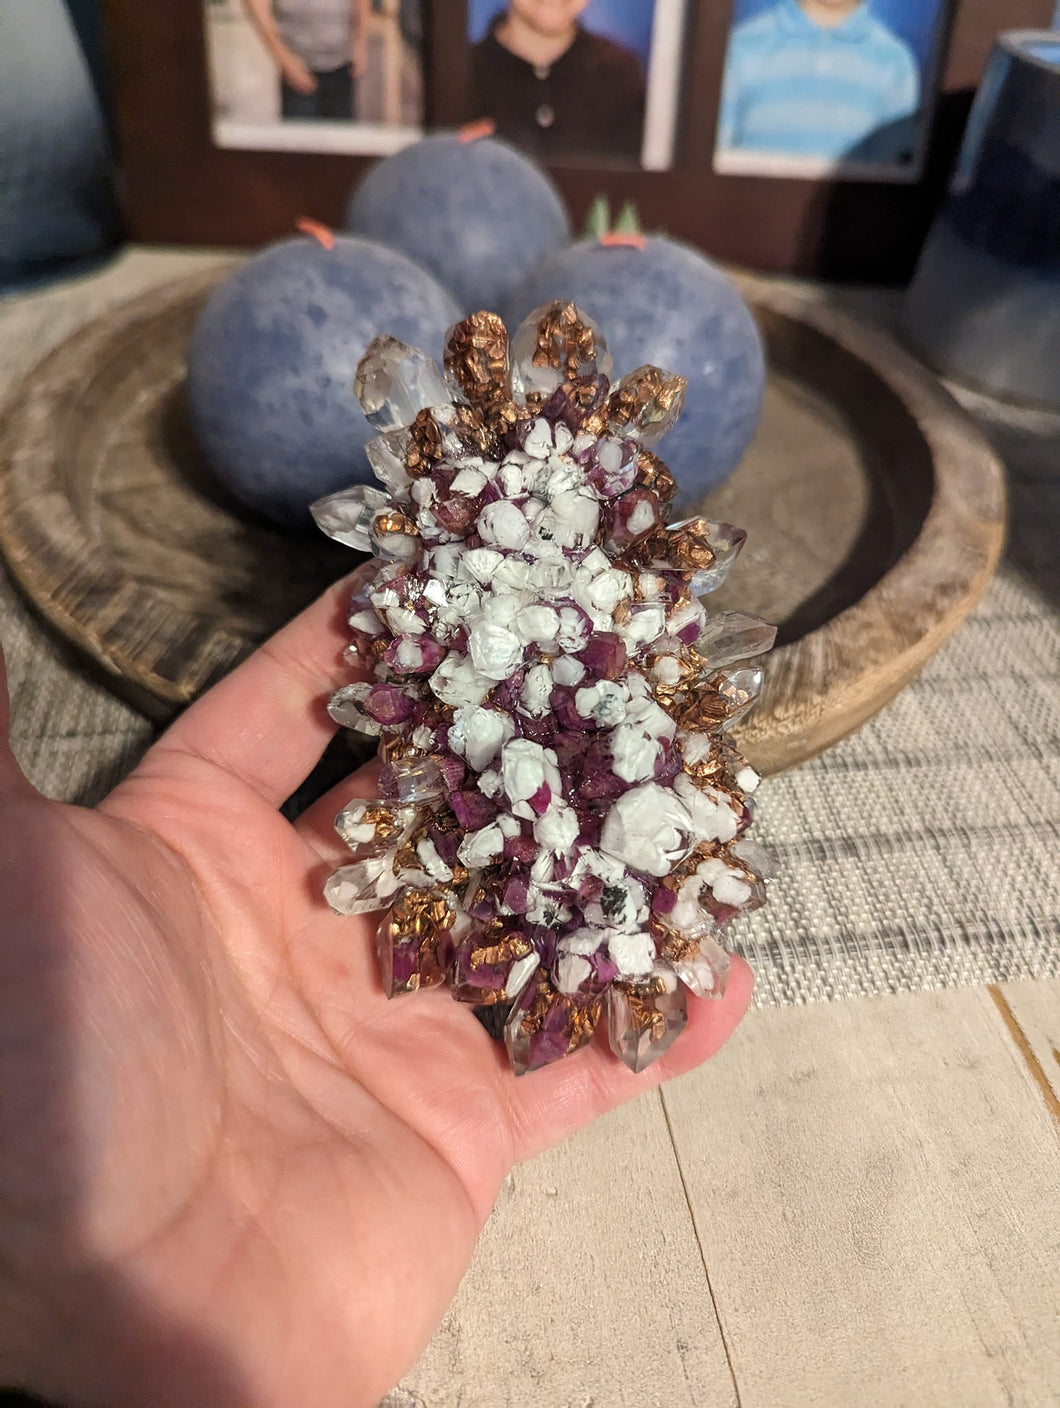 Crystal Cluster shaped orgonite with mangano calcite, ruby and copper